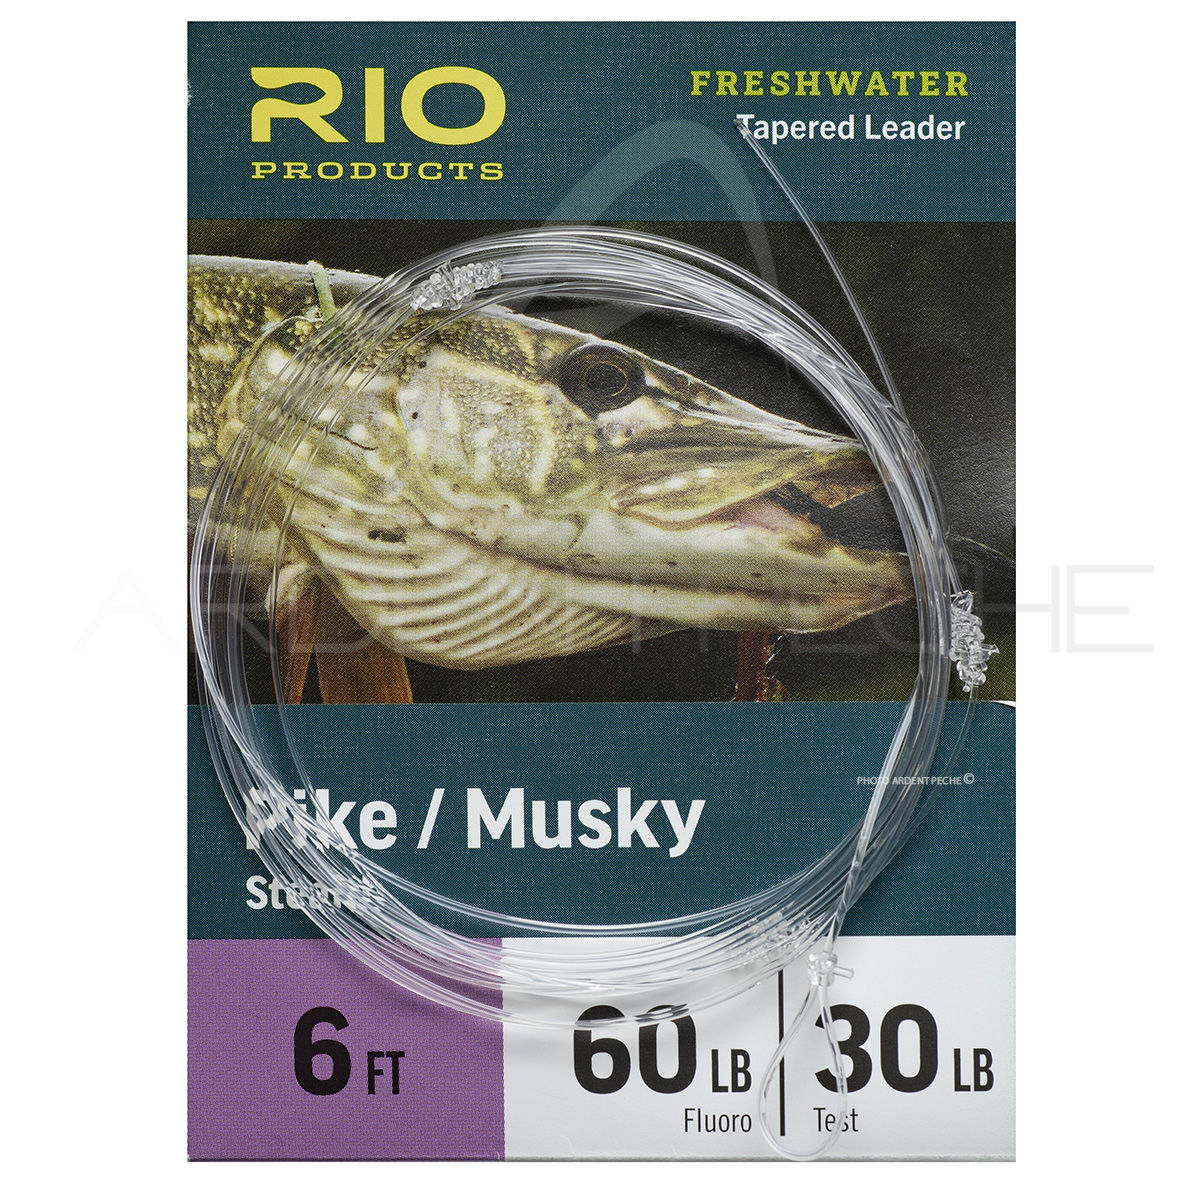 Rio Pike/Musky Tapered Leader 6ft - Fluoro 80lb Fluoro